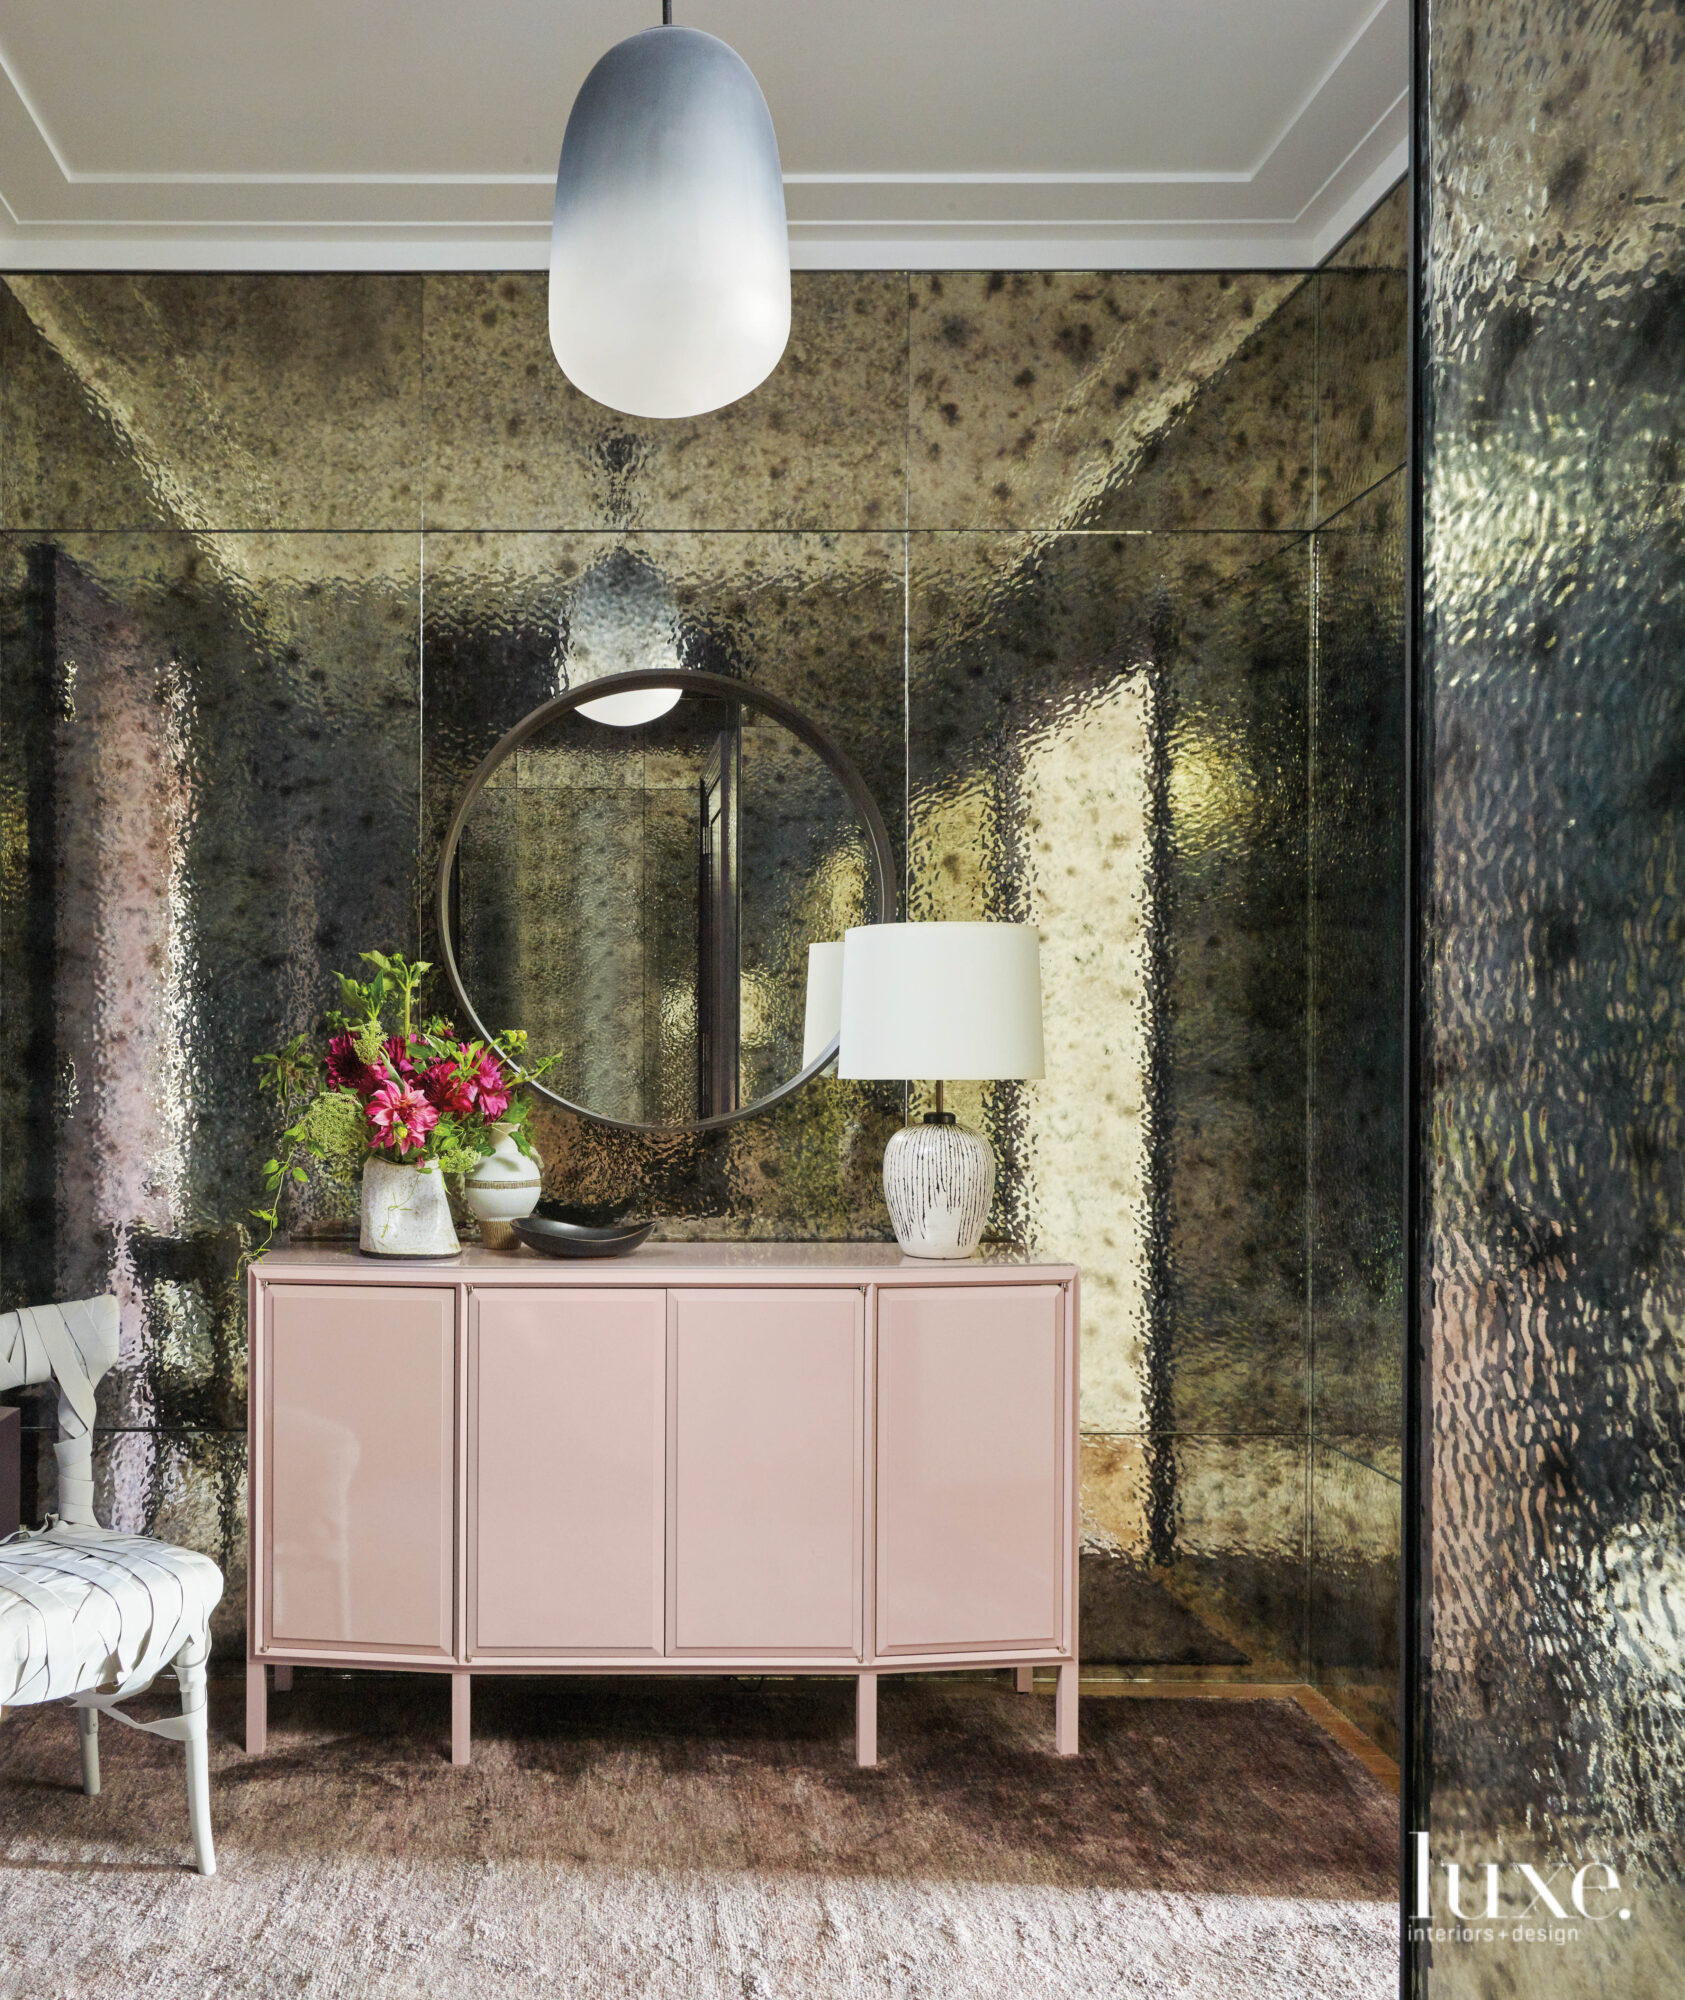 An antique, reflecting wall welcomes all who enter the apartment; a pink cabinet sits facing the door.